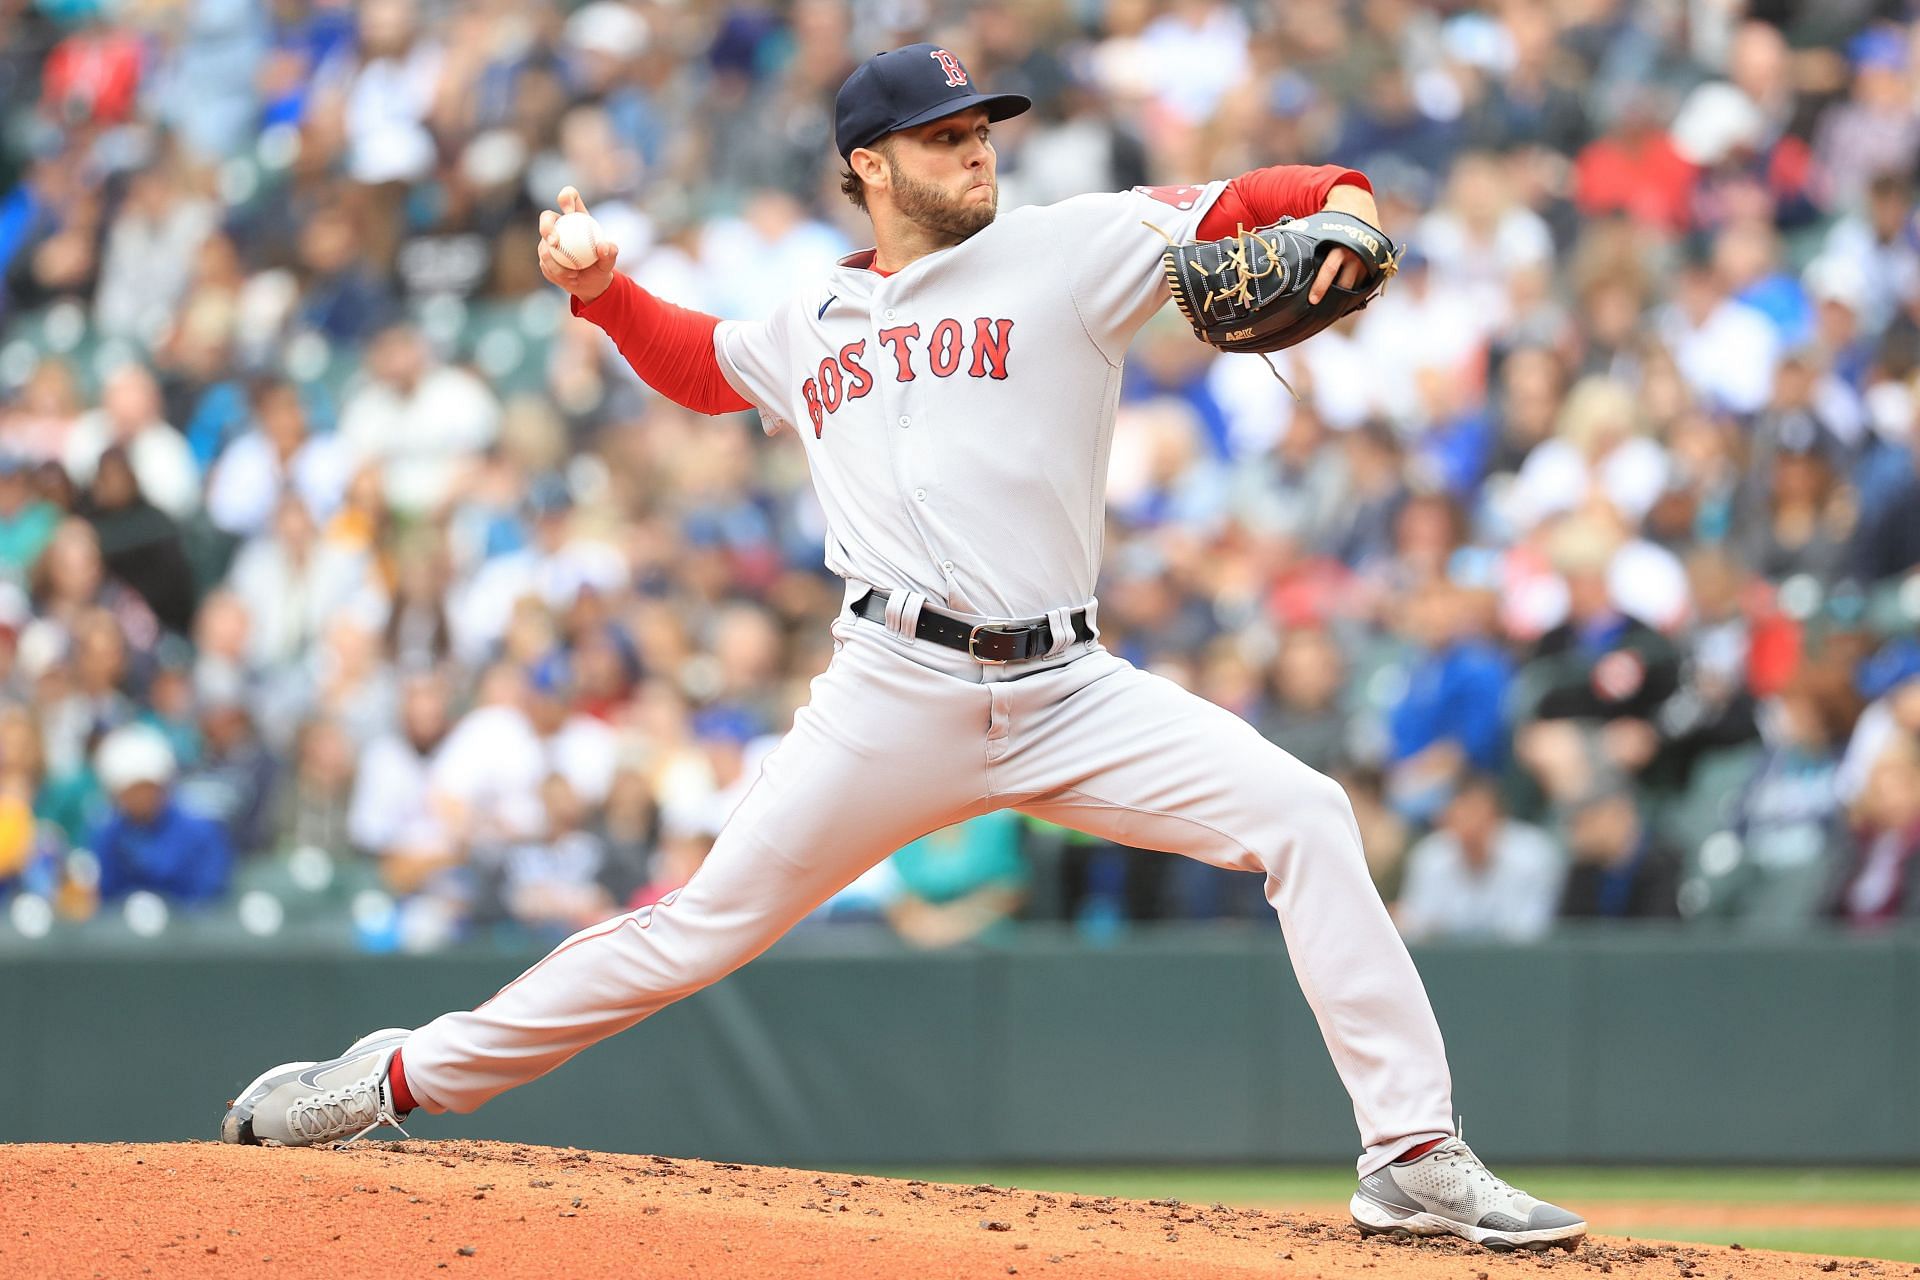 Kutter Crawford best to ever wear number 50 for the Red Sox” - Boston Red  Sox fans praise call-up pitcher Kutter Crawford after he strikes out 8 Rays  batters en route to